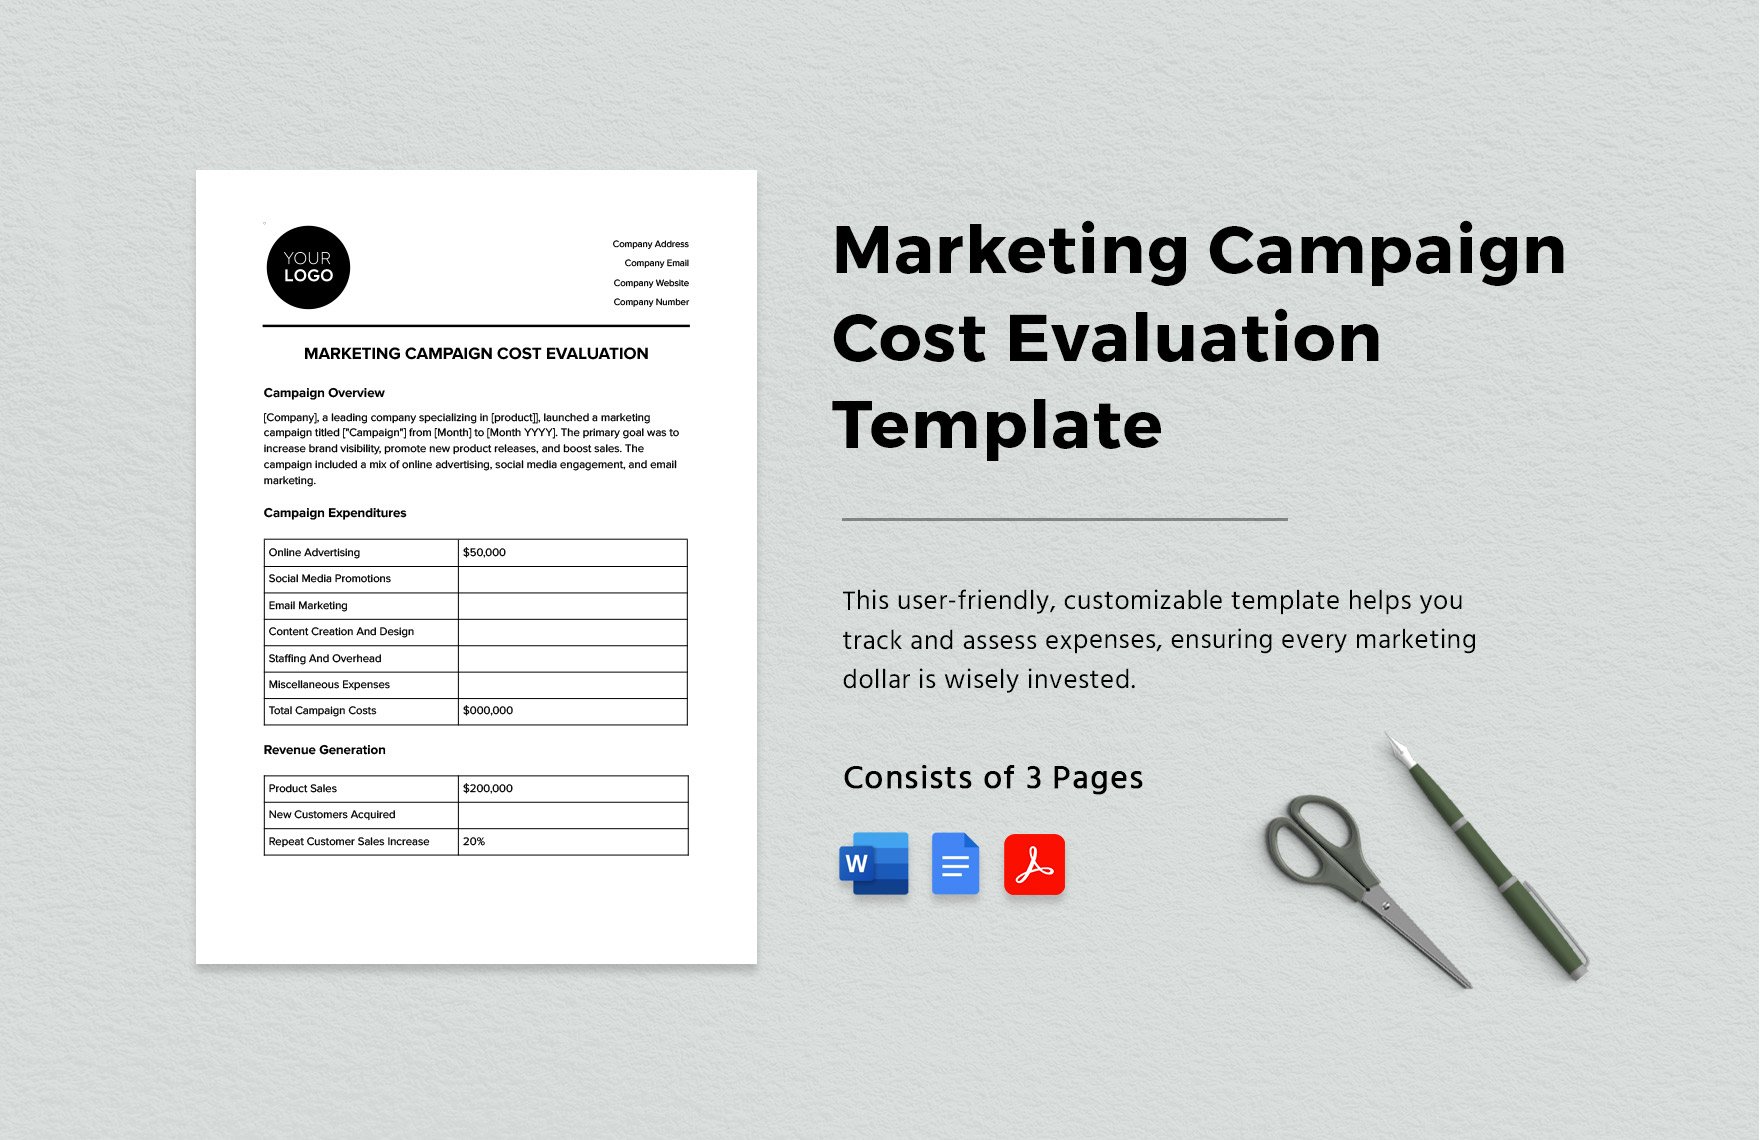 Marketing Campaign Cost Evaluation Template